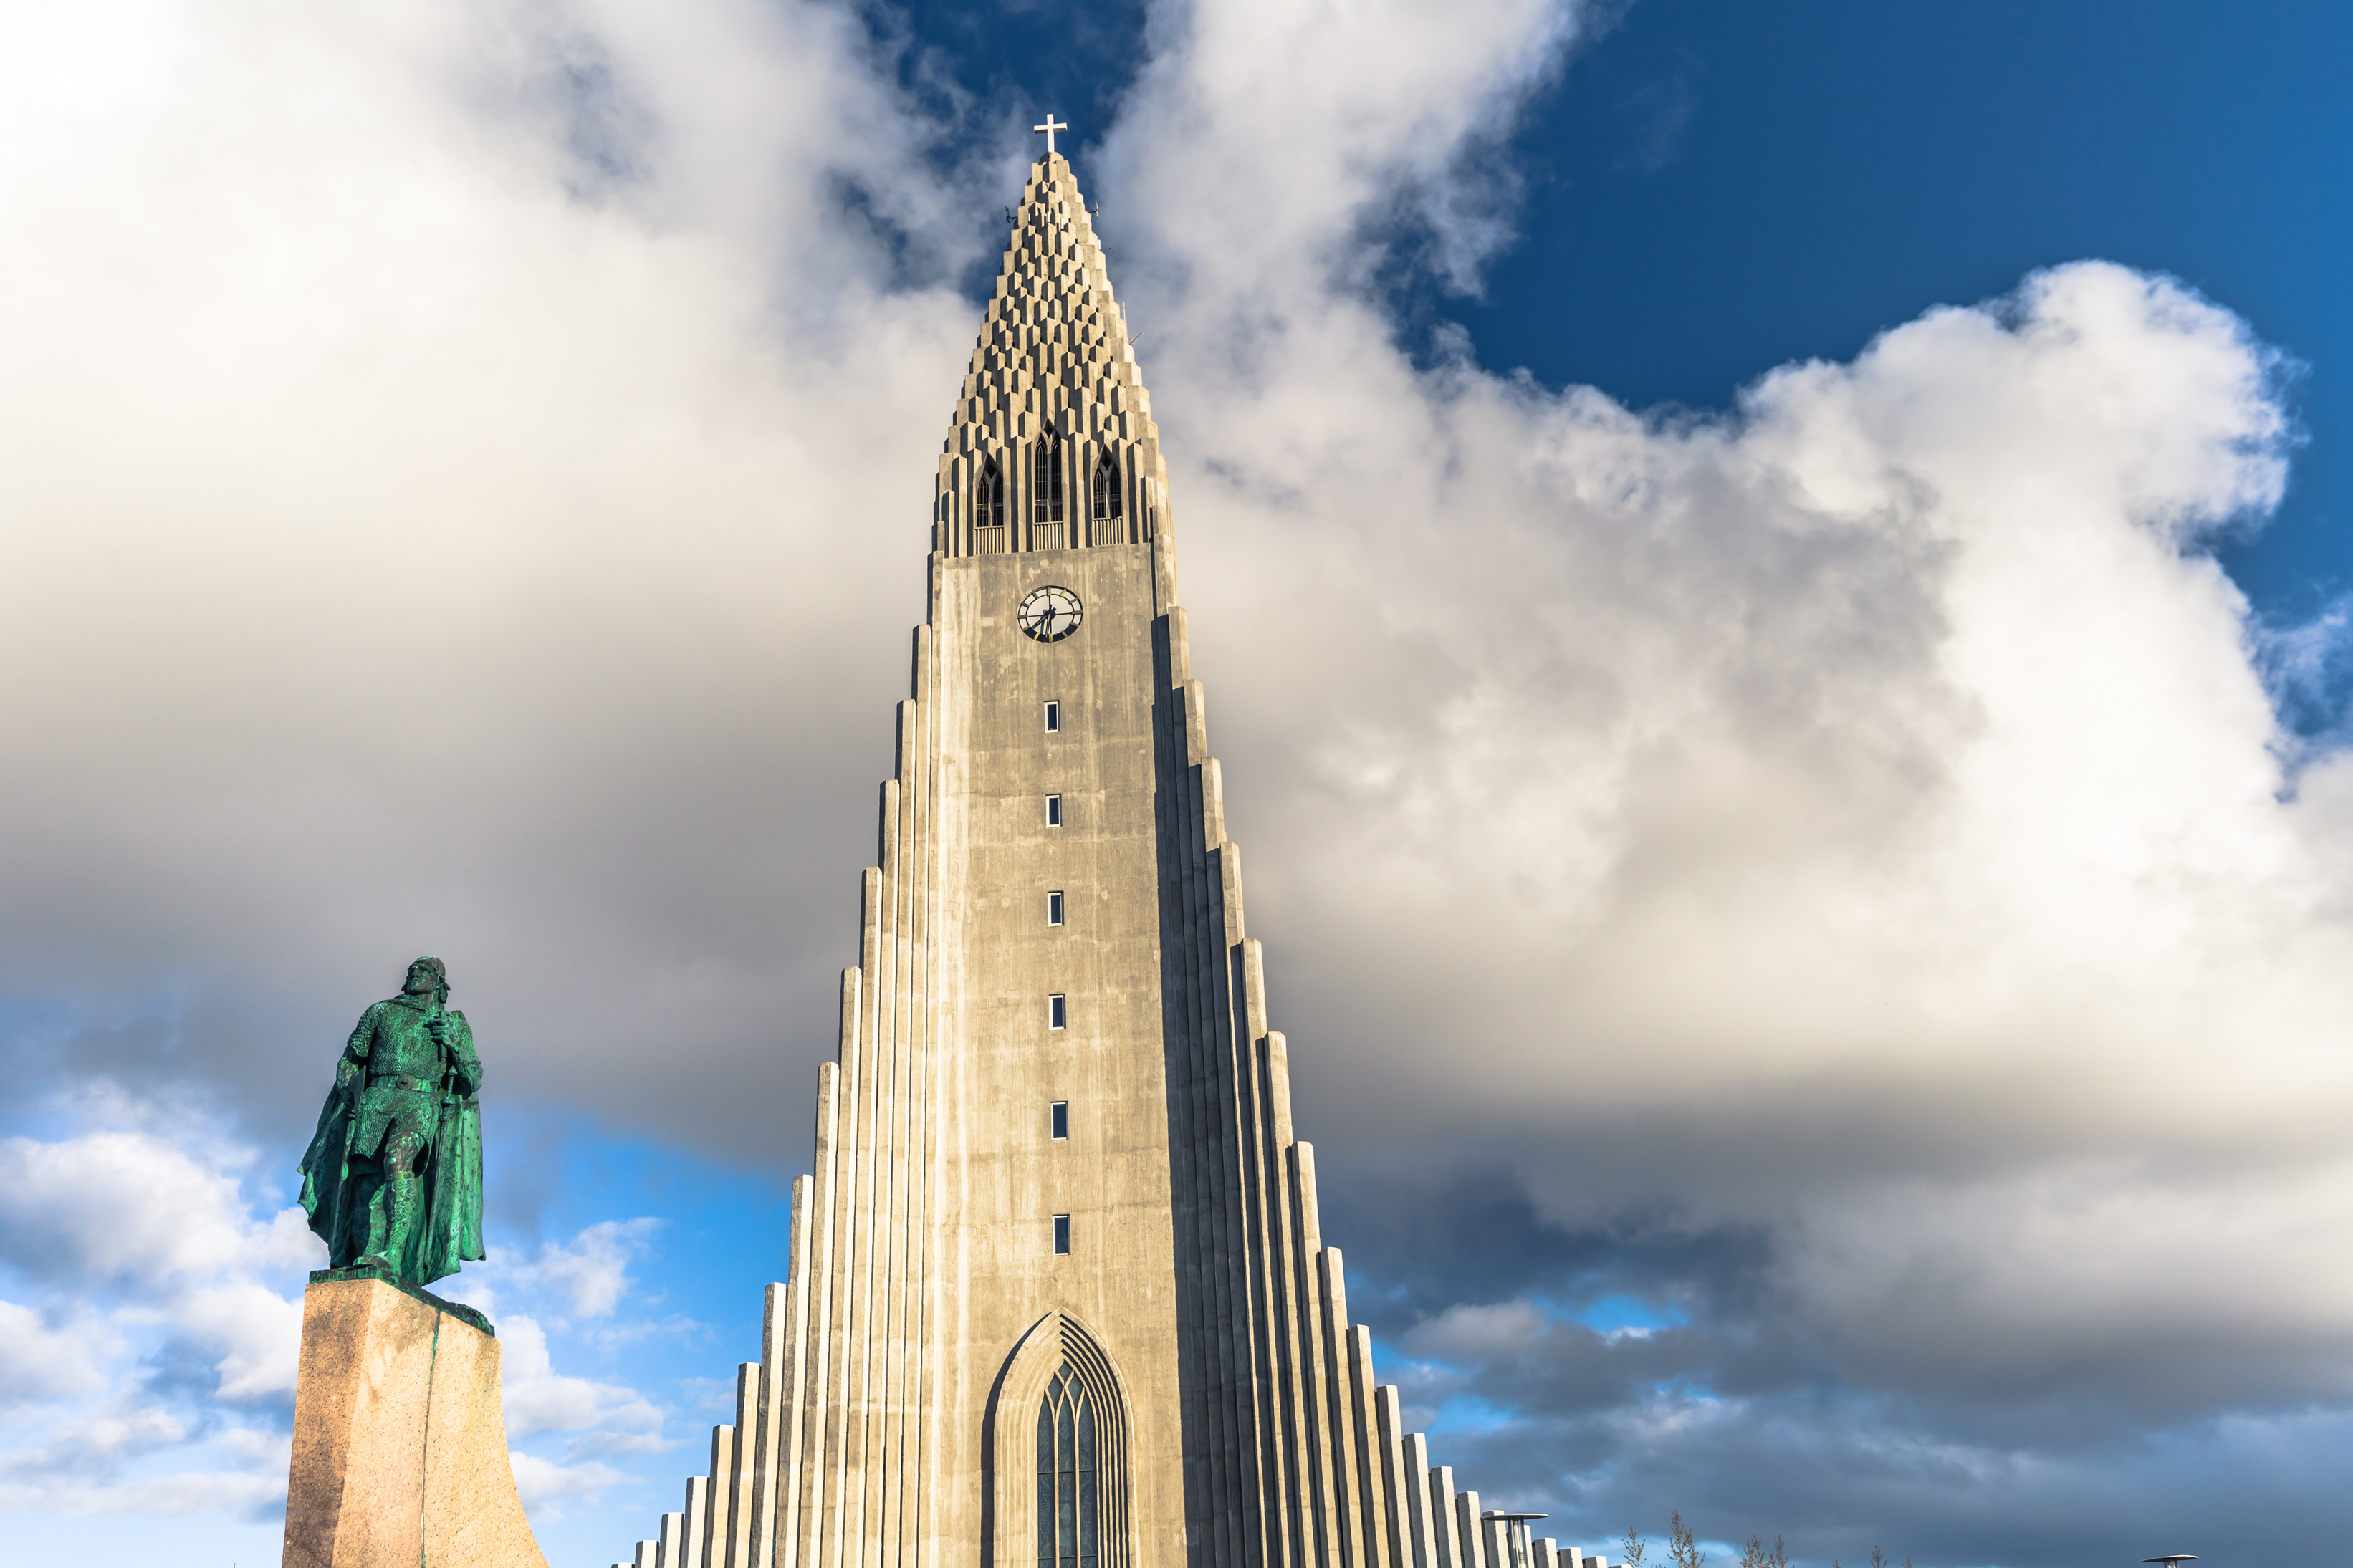 Reykjavik - May 01, 2018: Statue of Leif Erikson in the center of Reykjavik, Iceland